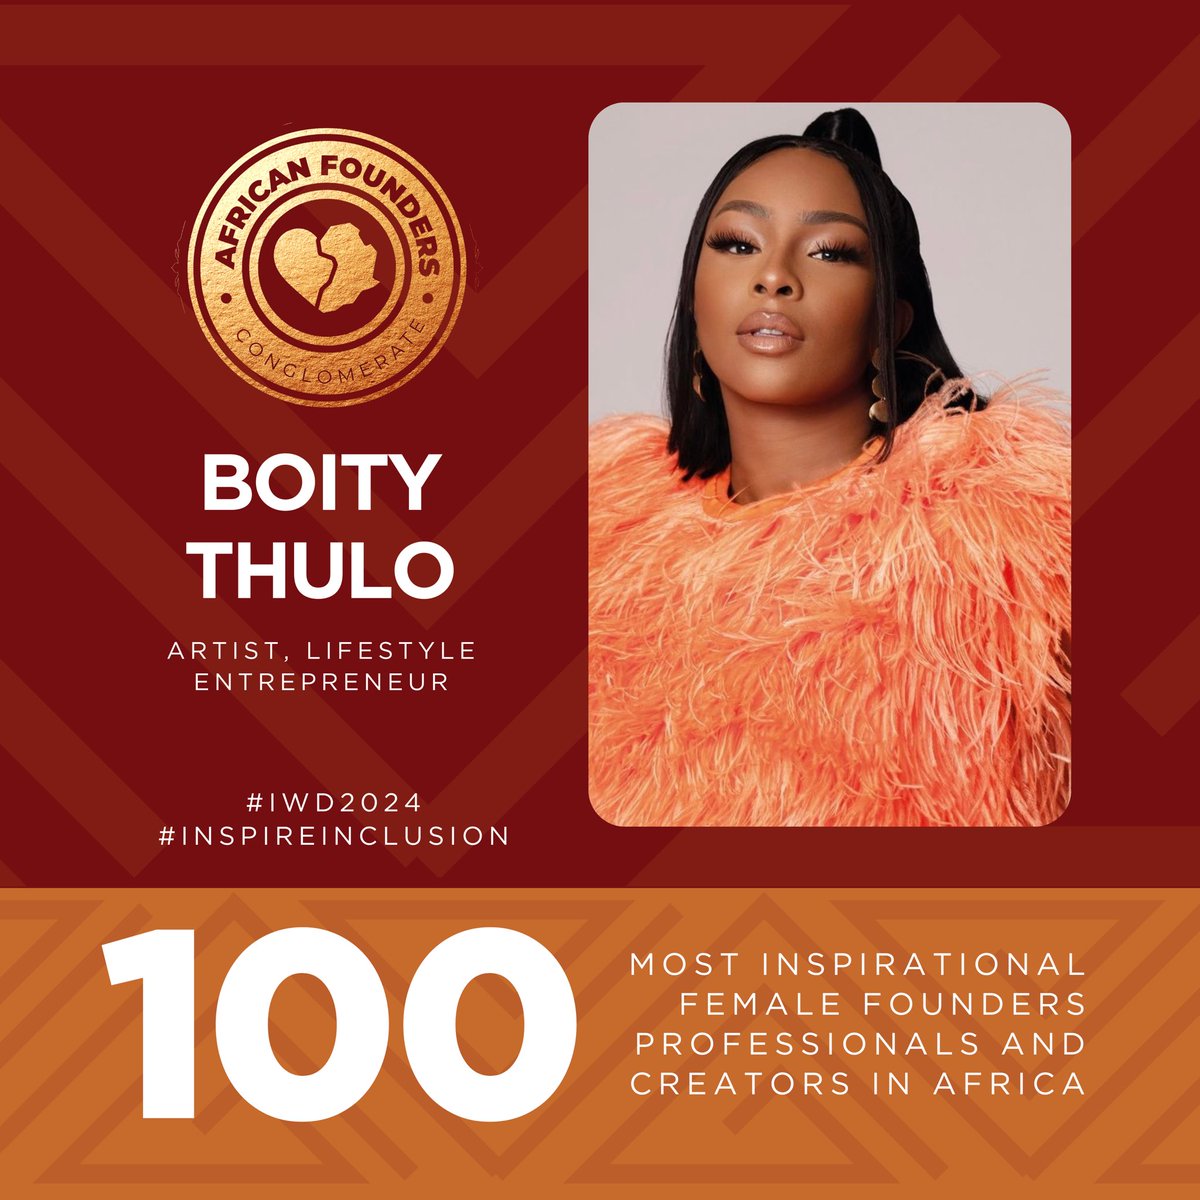 #AFCFeatures In celebration of the international women's month, we honor @Boity for her impact, strides and great entrepreneurial spirit. #iwd2024 #inspireinclusion